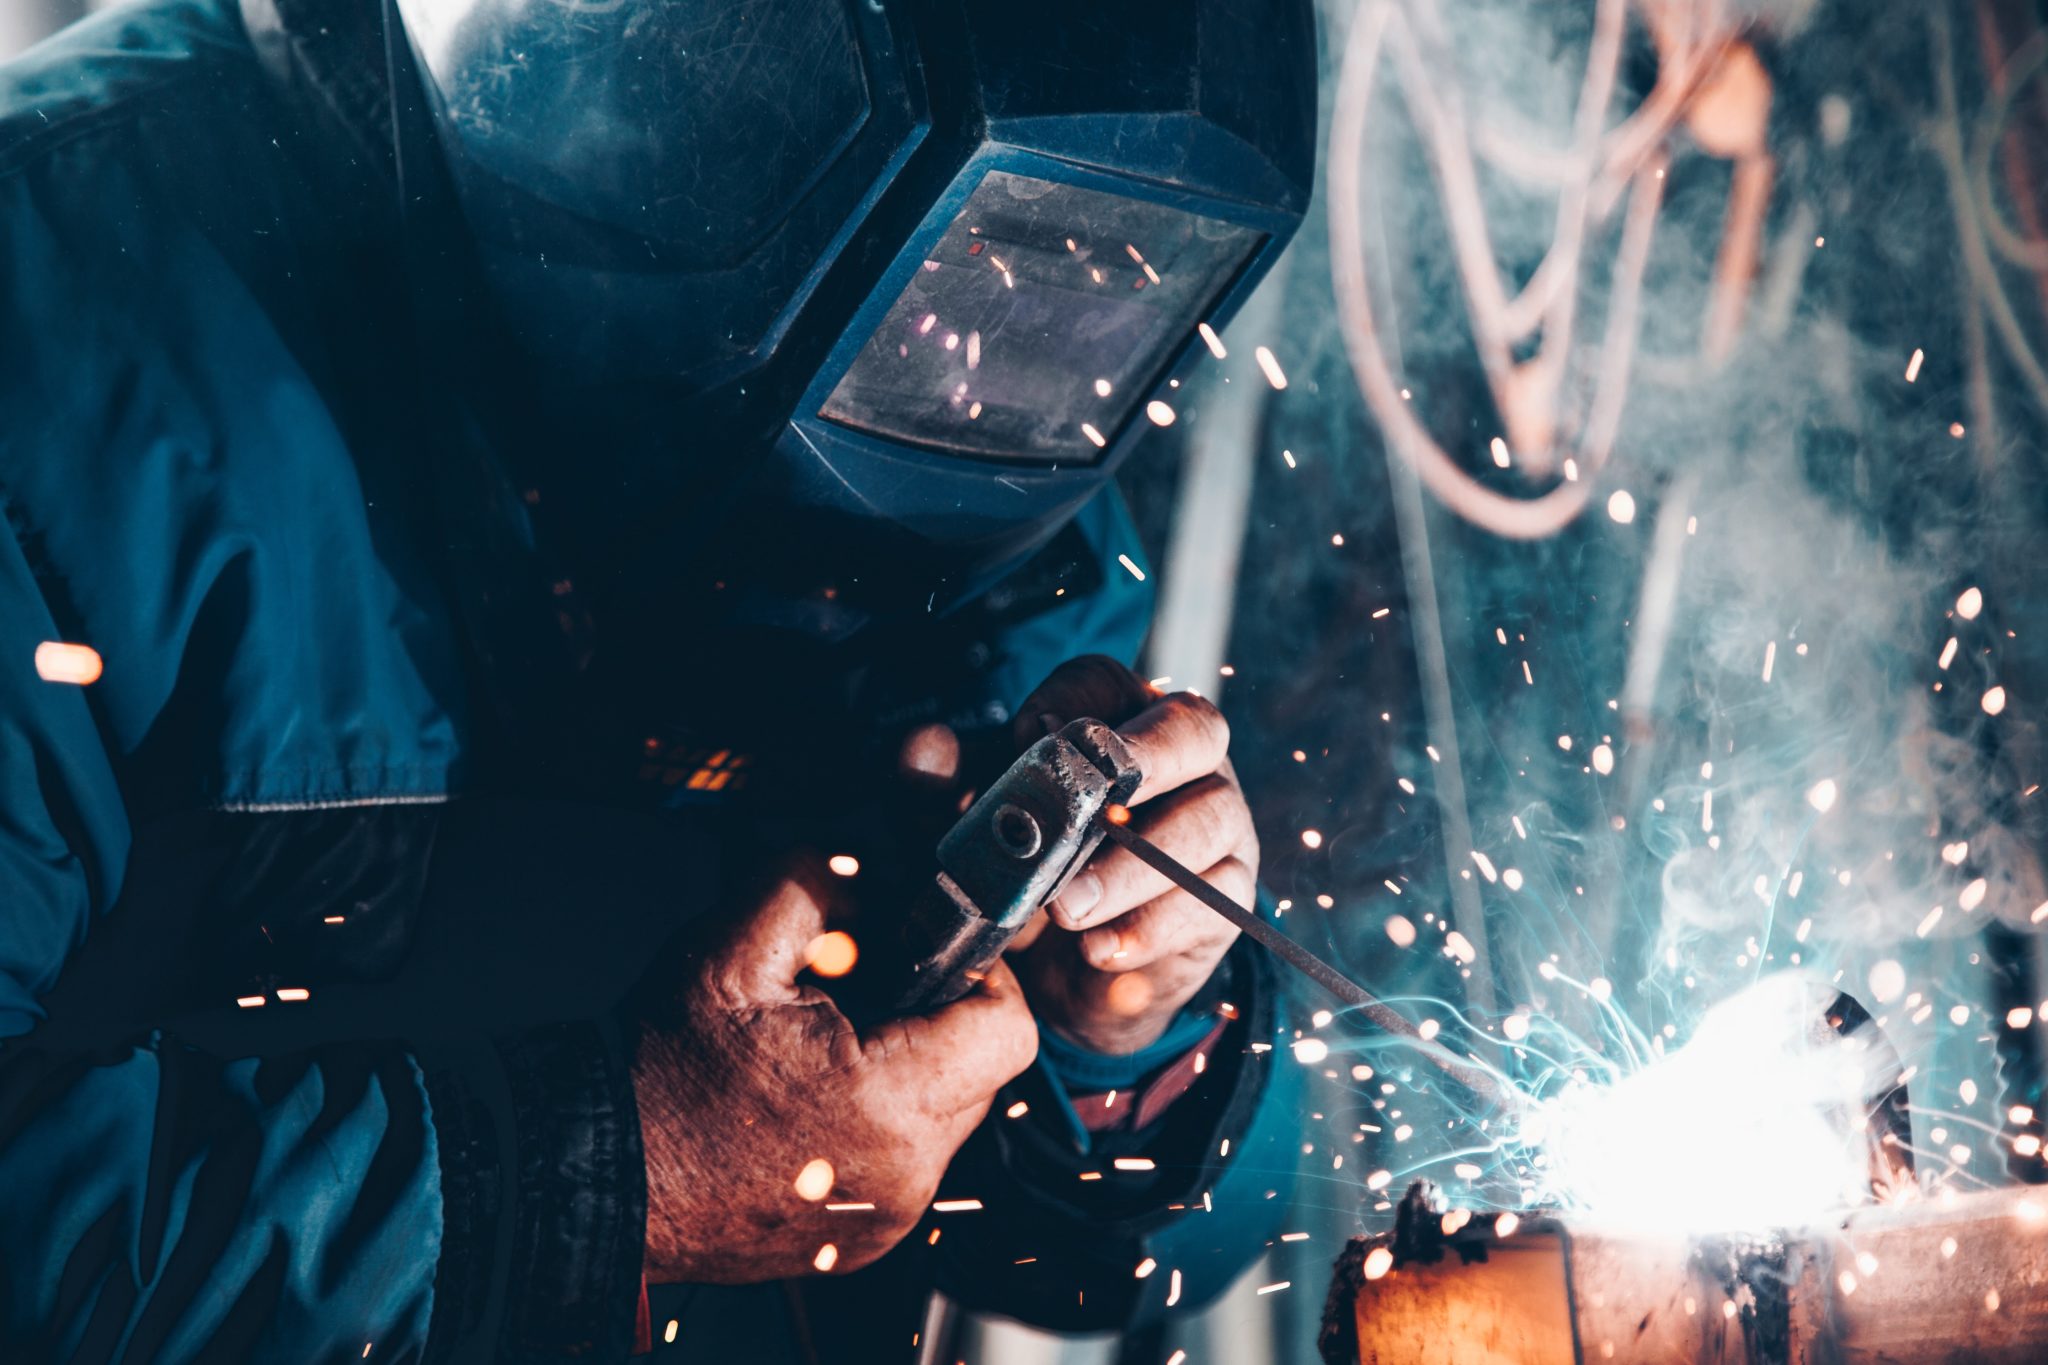 Metal fabrication tools and equipment for a manufacturing business